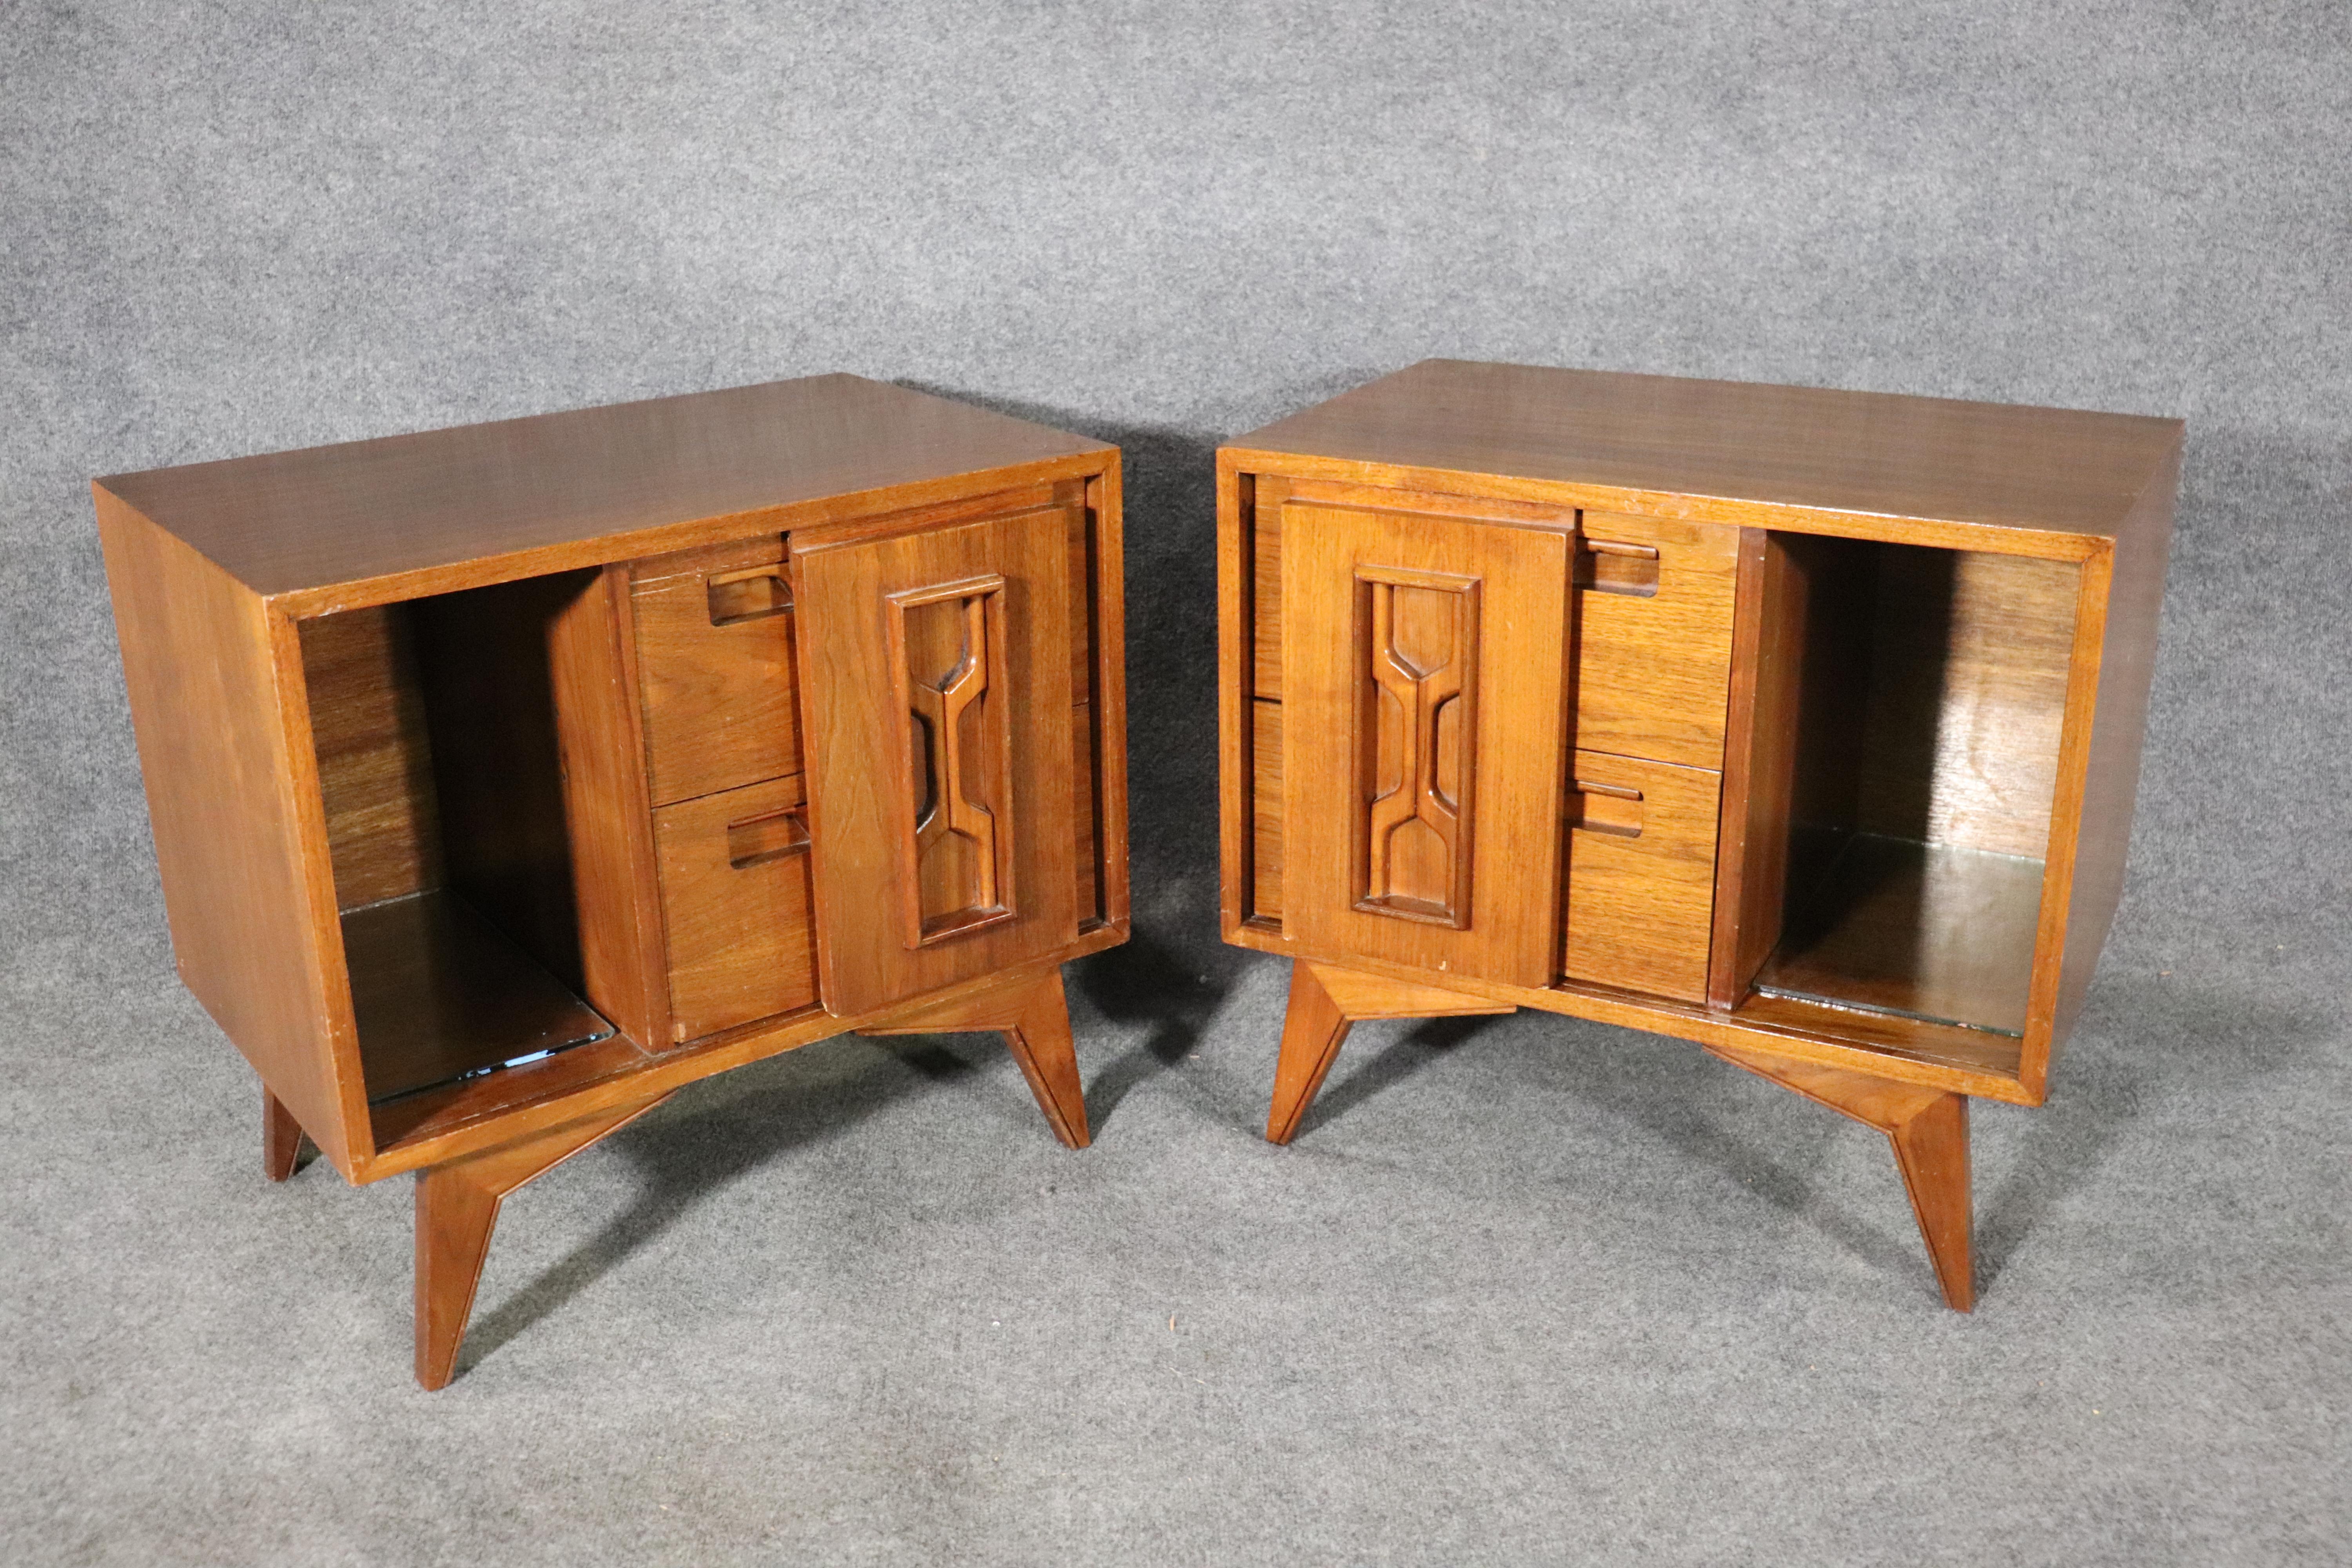 Pair of mid-century end tables with sculpted fronts. Sliding door cabinet and two drawers for bedside storage.
Please confirm location.